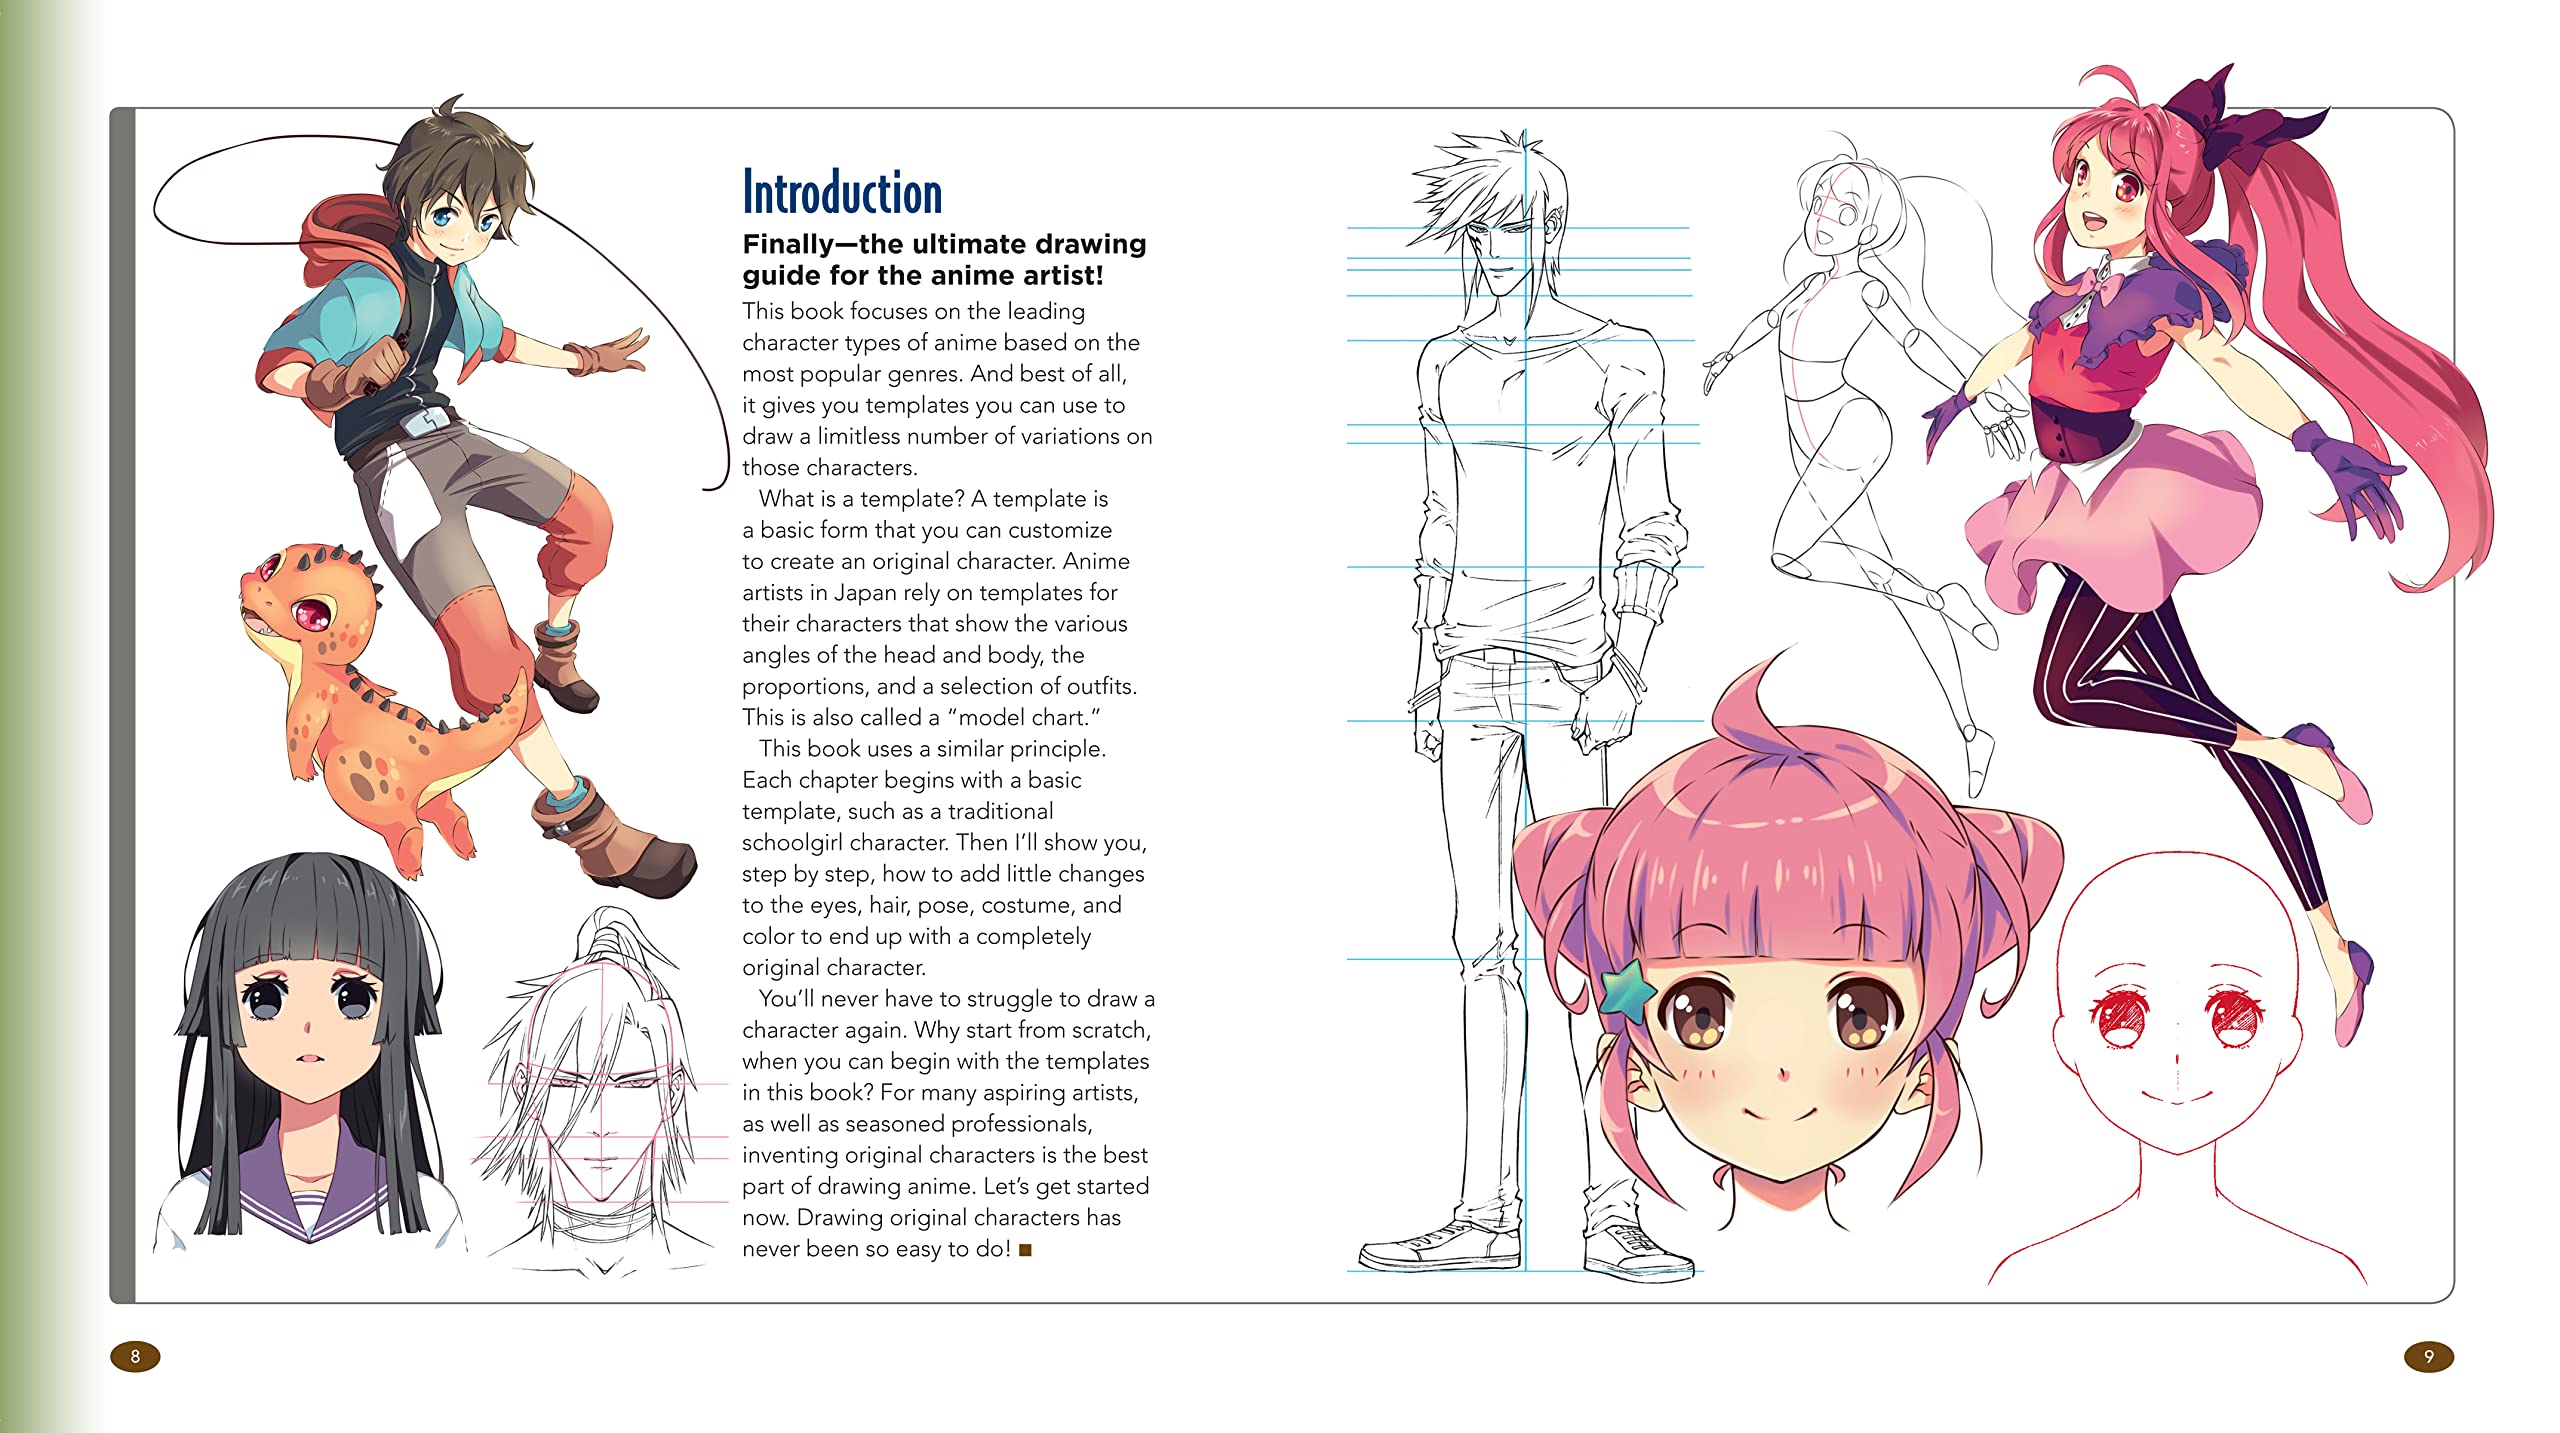 The Master Guide to Drawing Anime: How to Draw Original Characters from Simple Templates – A How to Draw Anime / Manga Books Series (Volume 1)